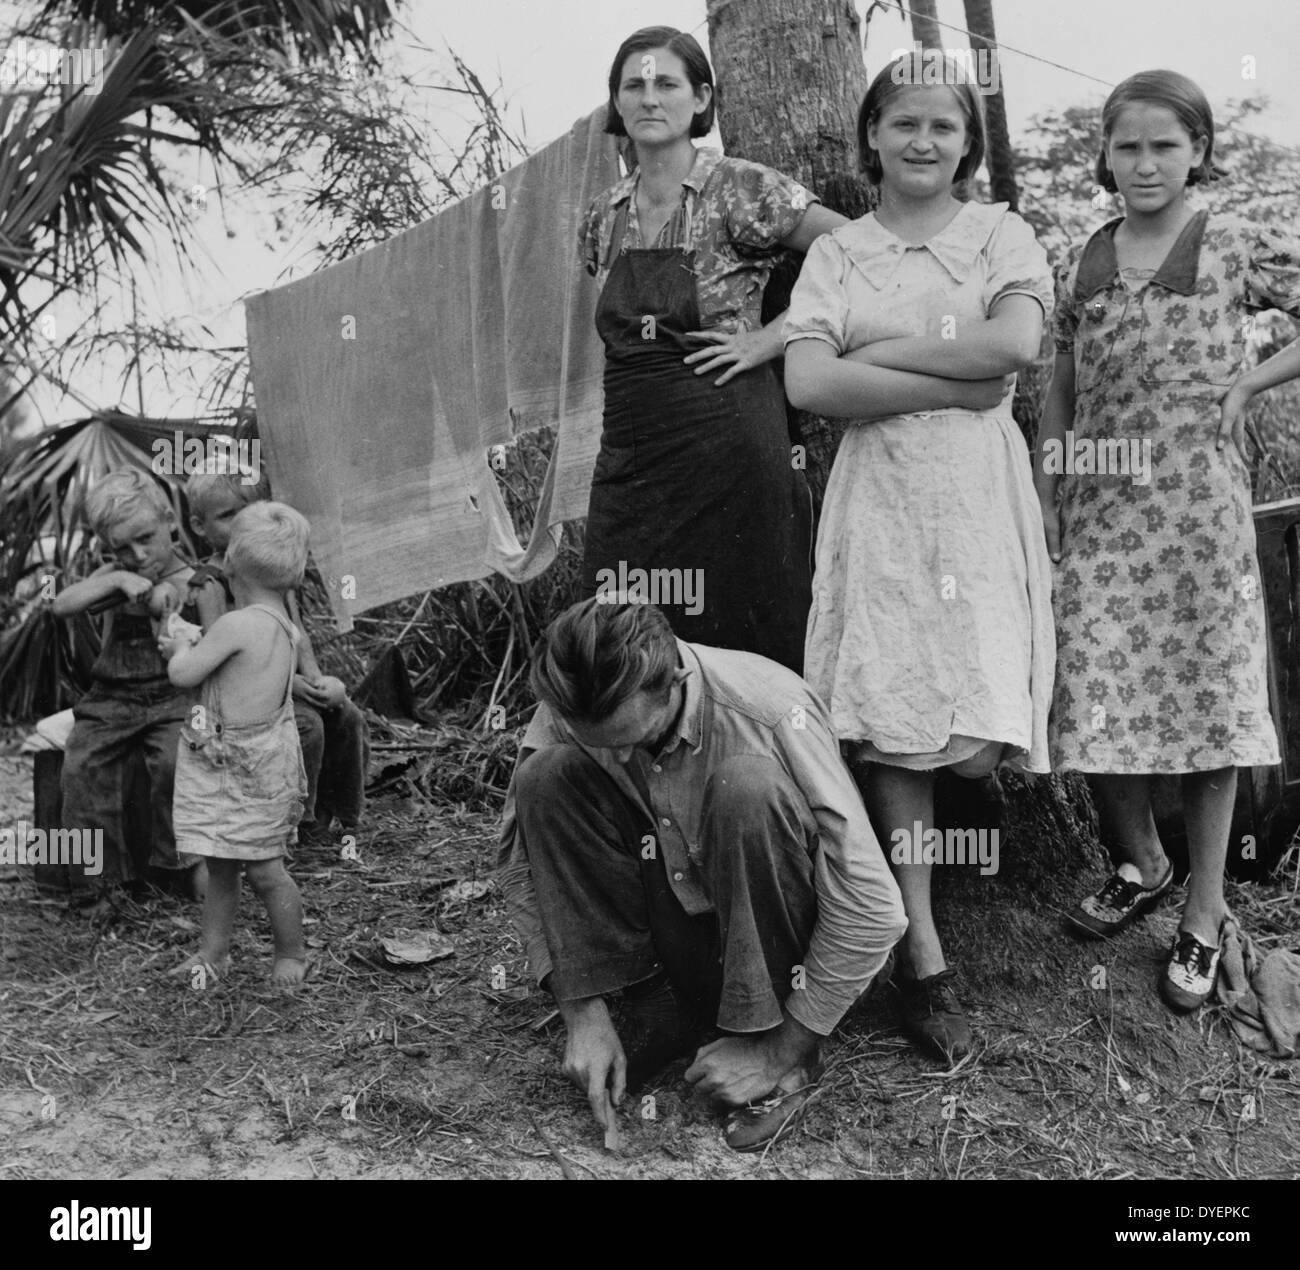 Migrant labourer's family, packing house workers. Canal Point, Florida by Marion Post Wolcott, 1910-1990, photographer 19390101 Stock Photo